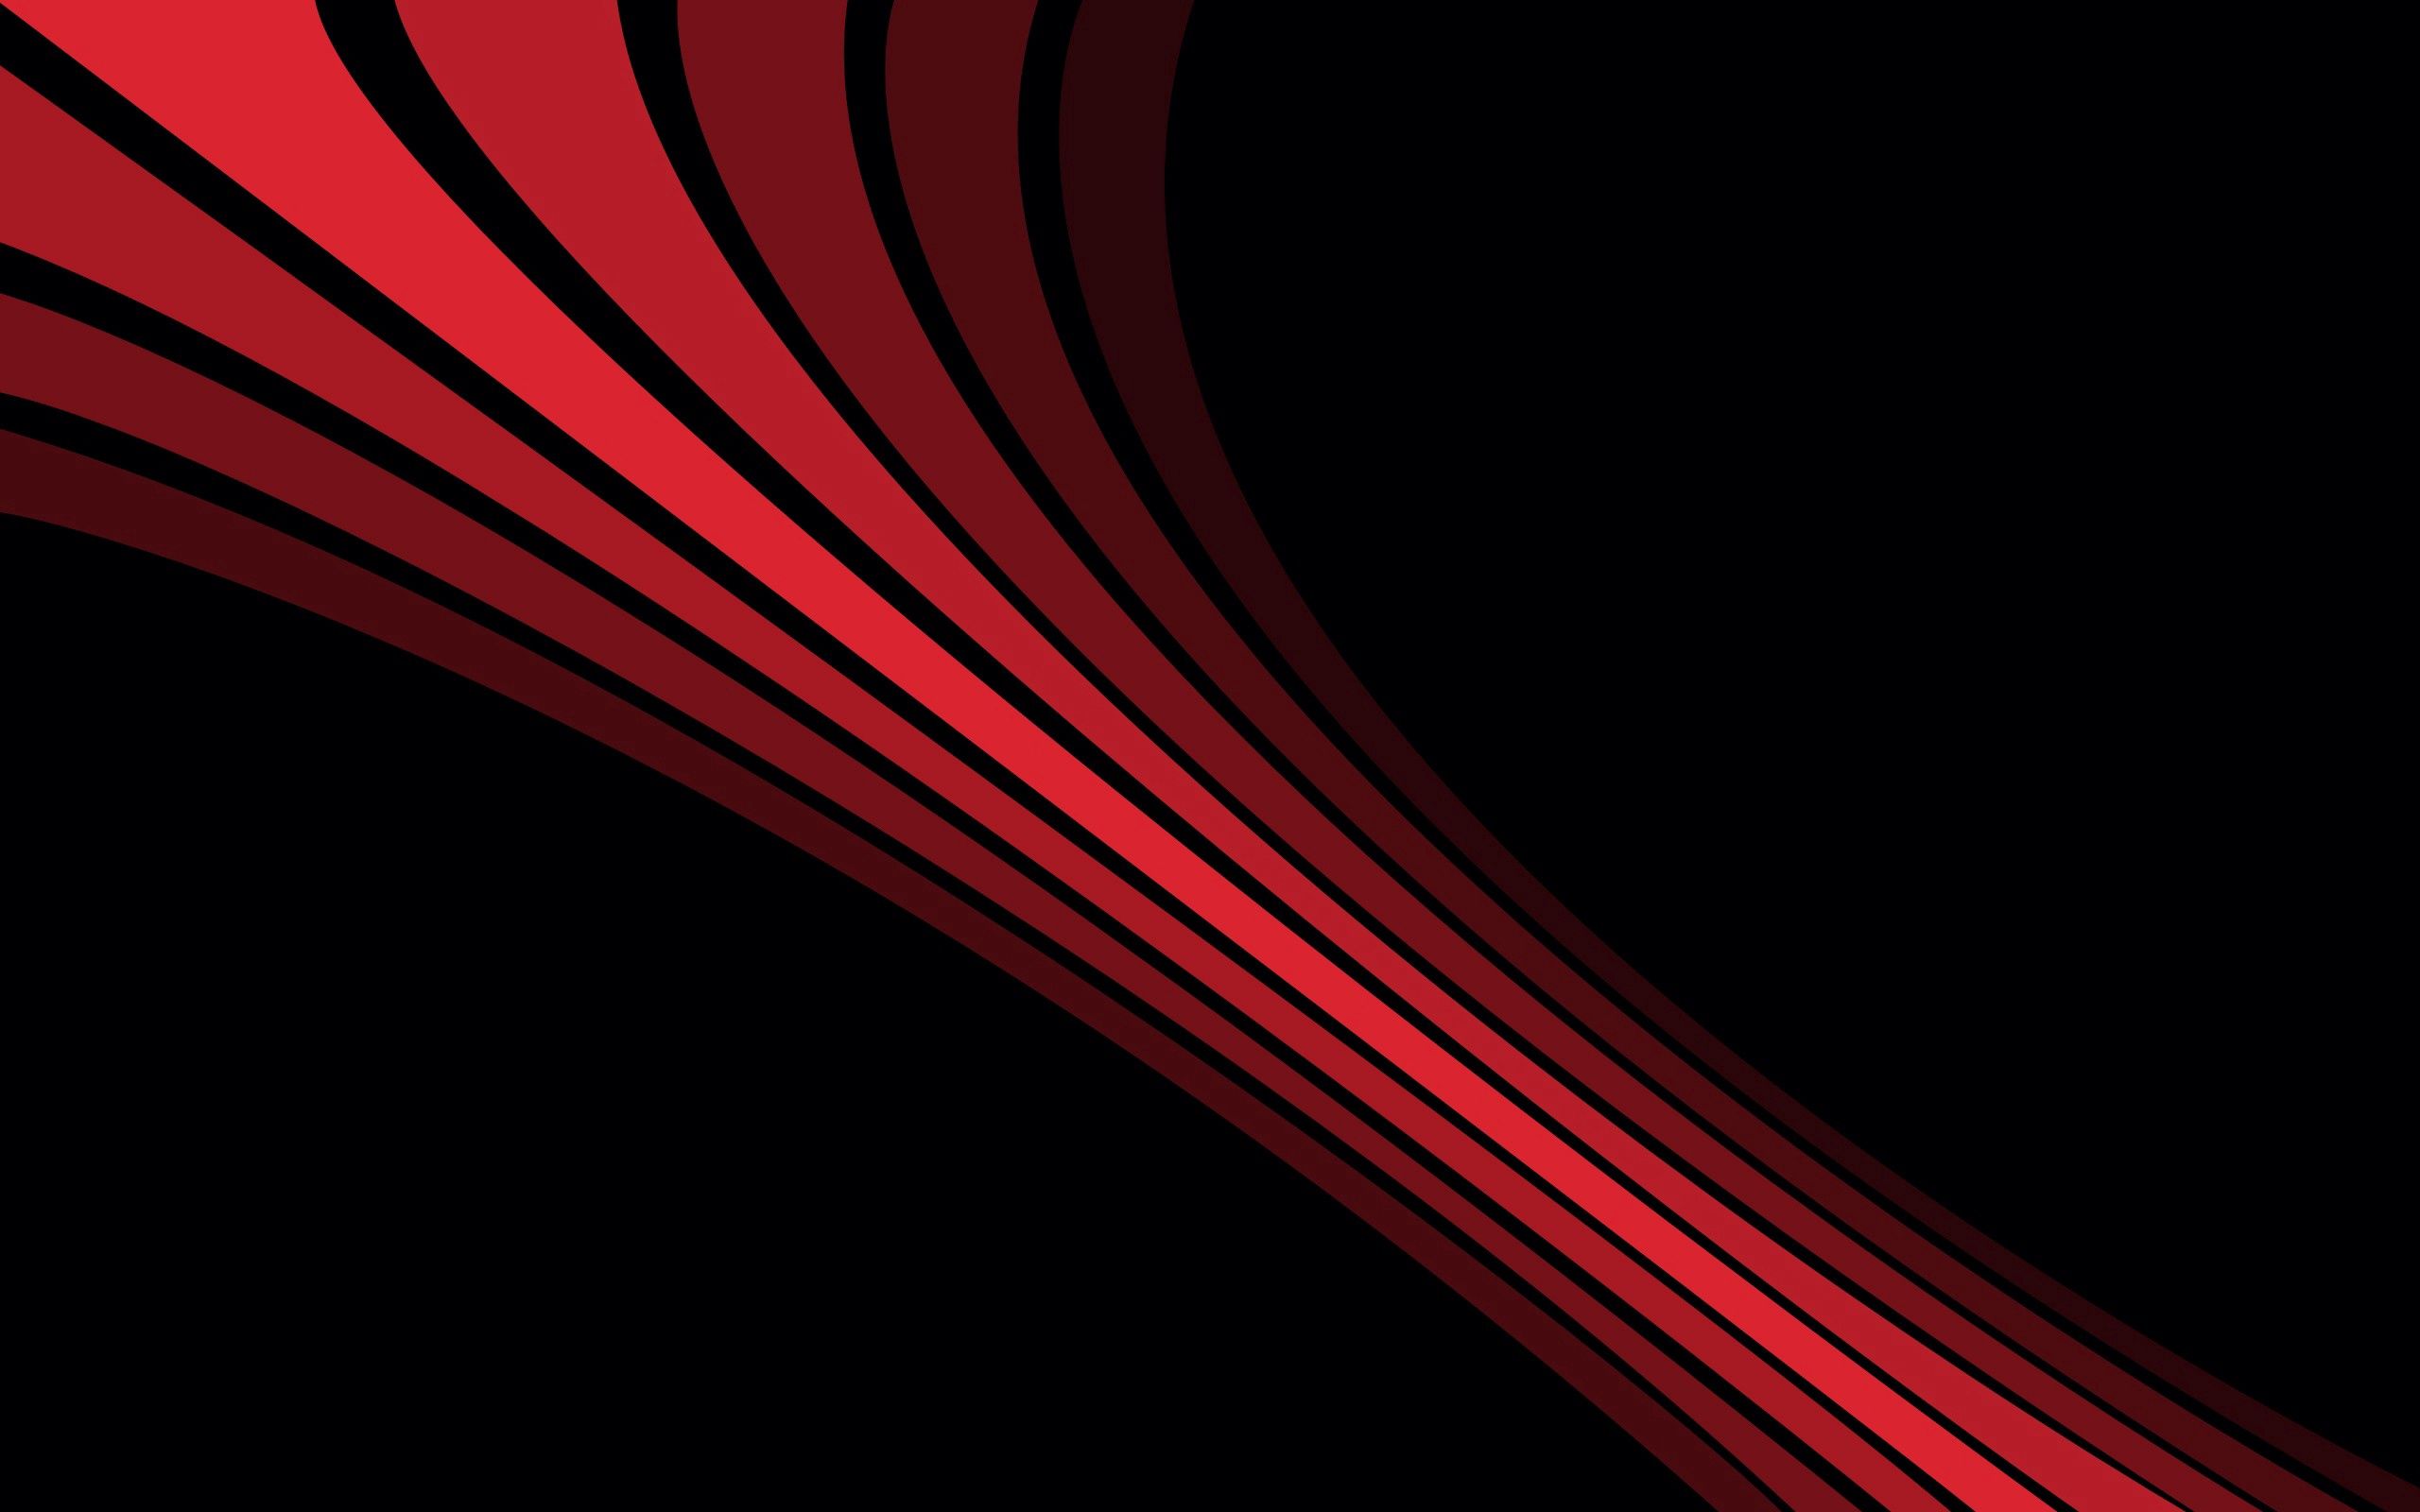 streaks, form, black, lines, abstract, red, shadow, stripes images